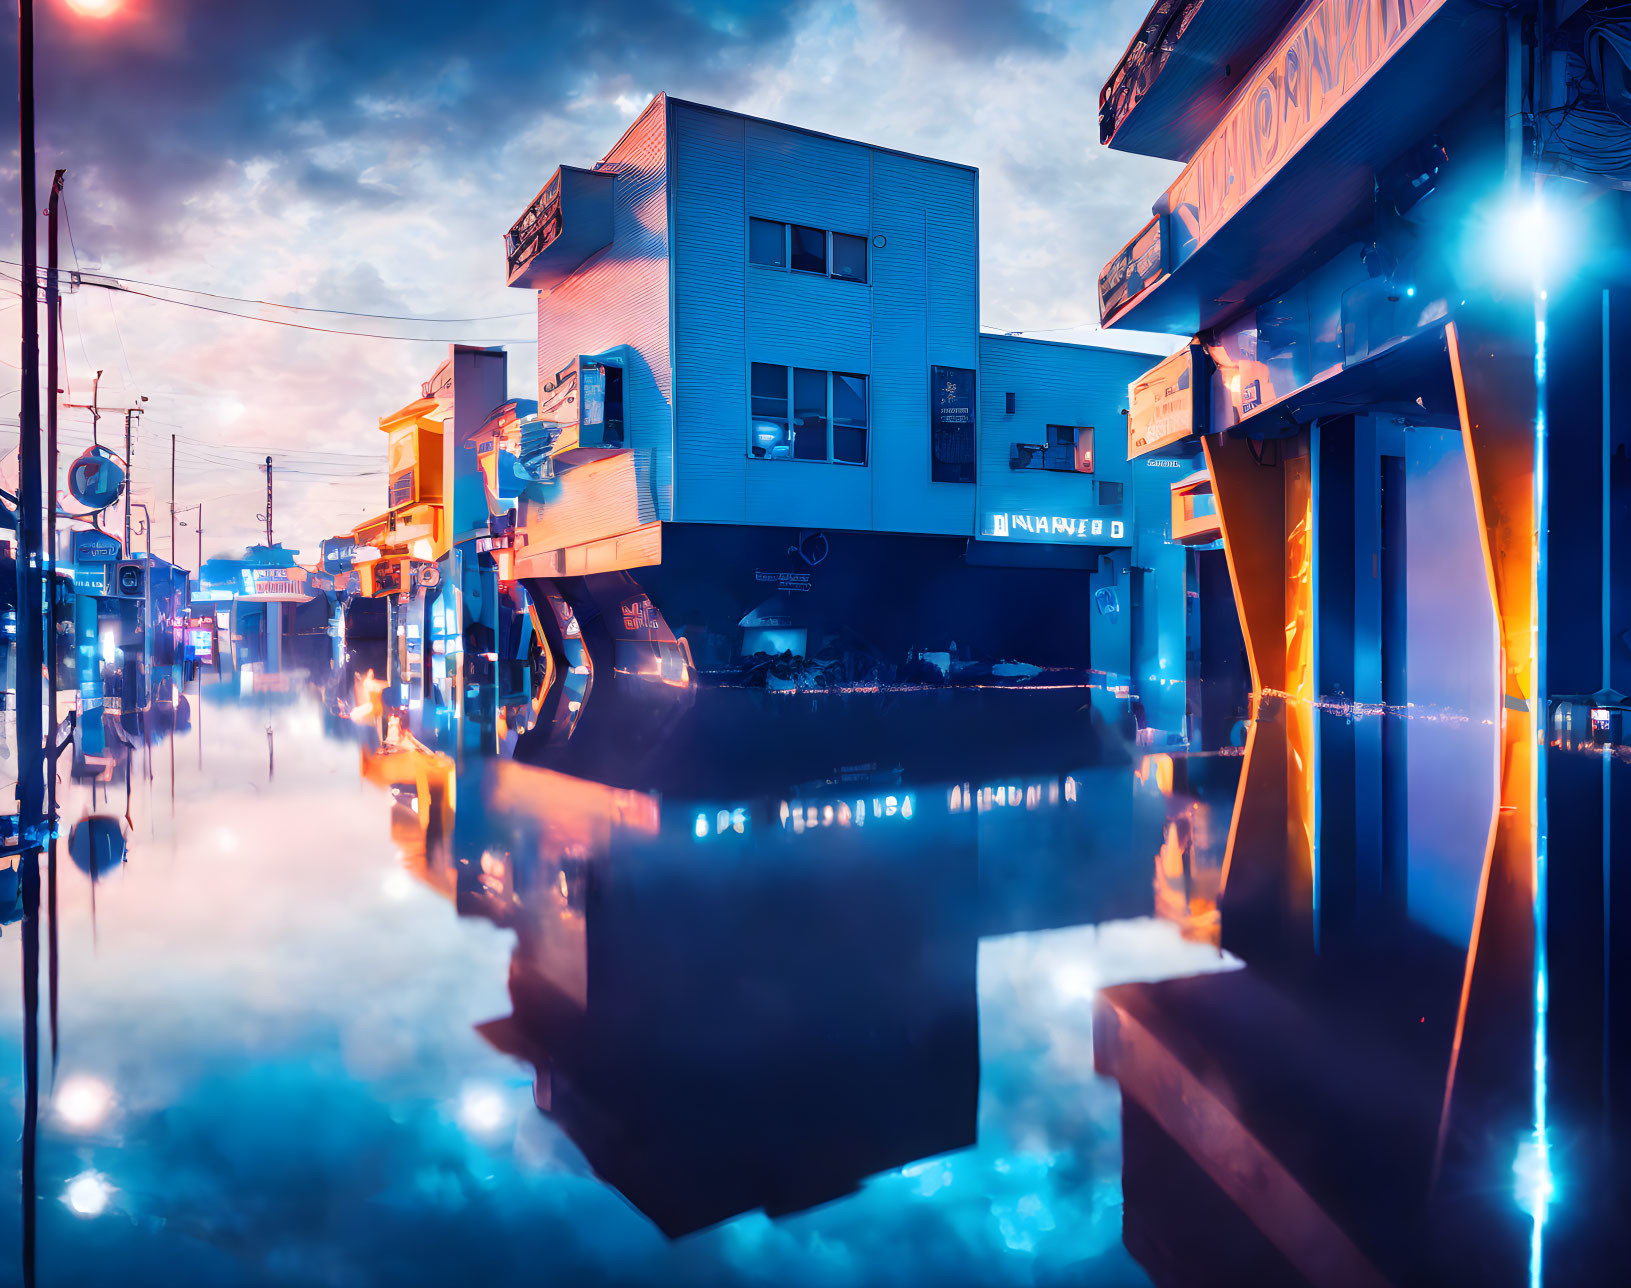 Surreal urban scene with neon lights and mist in blue and purple palette